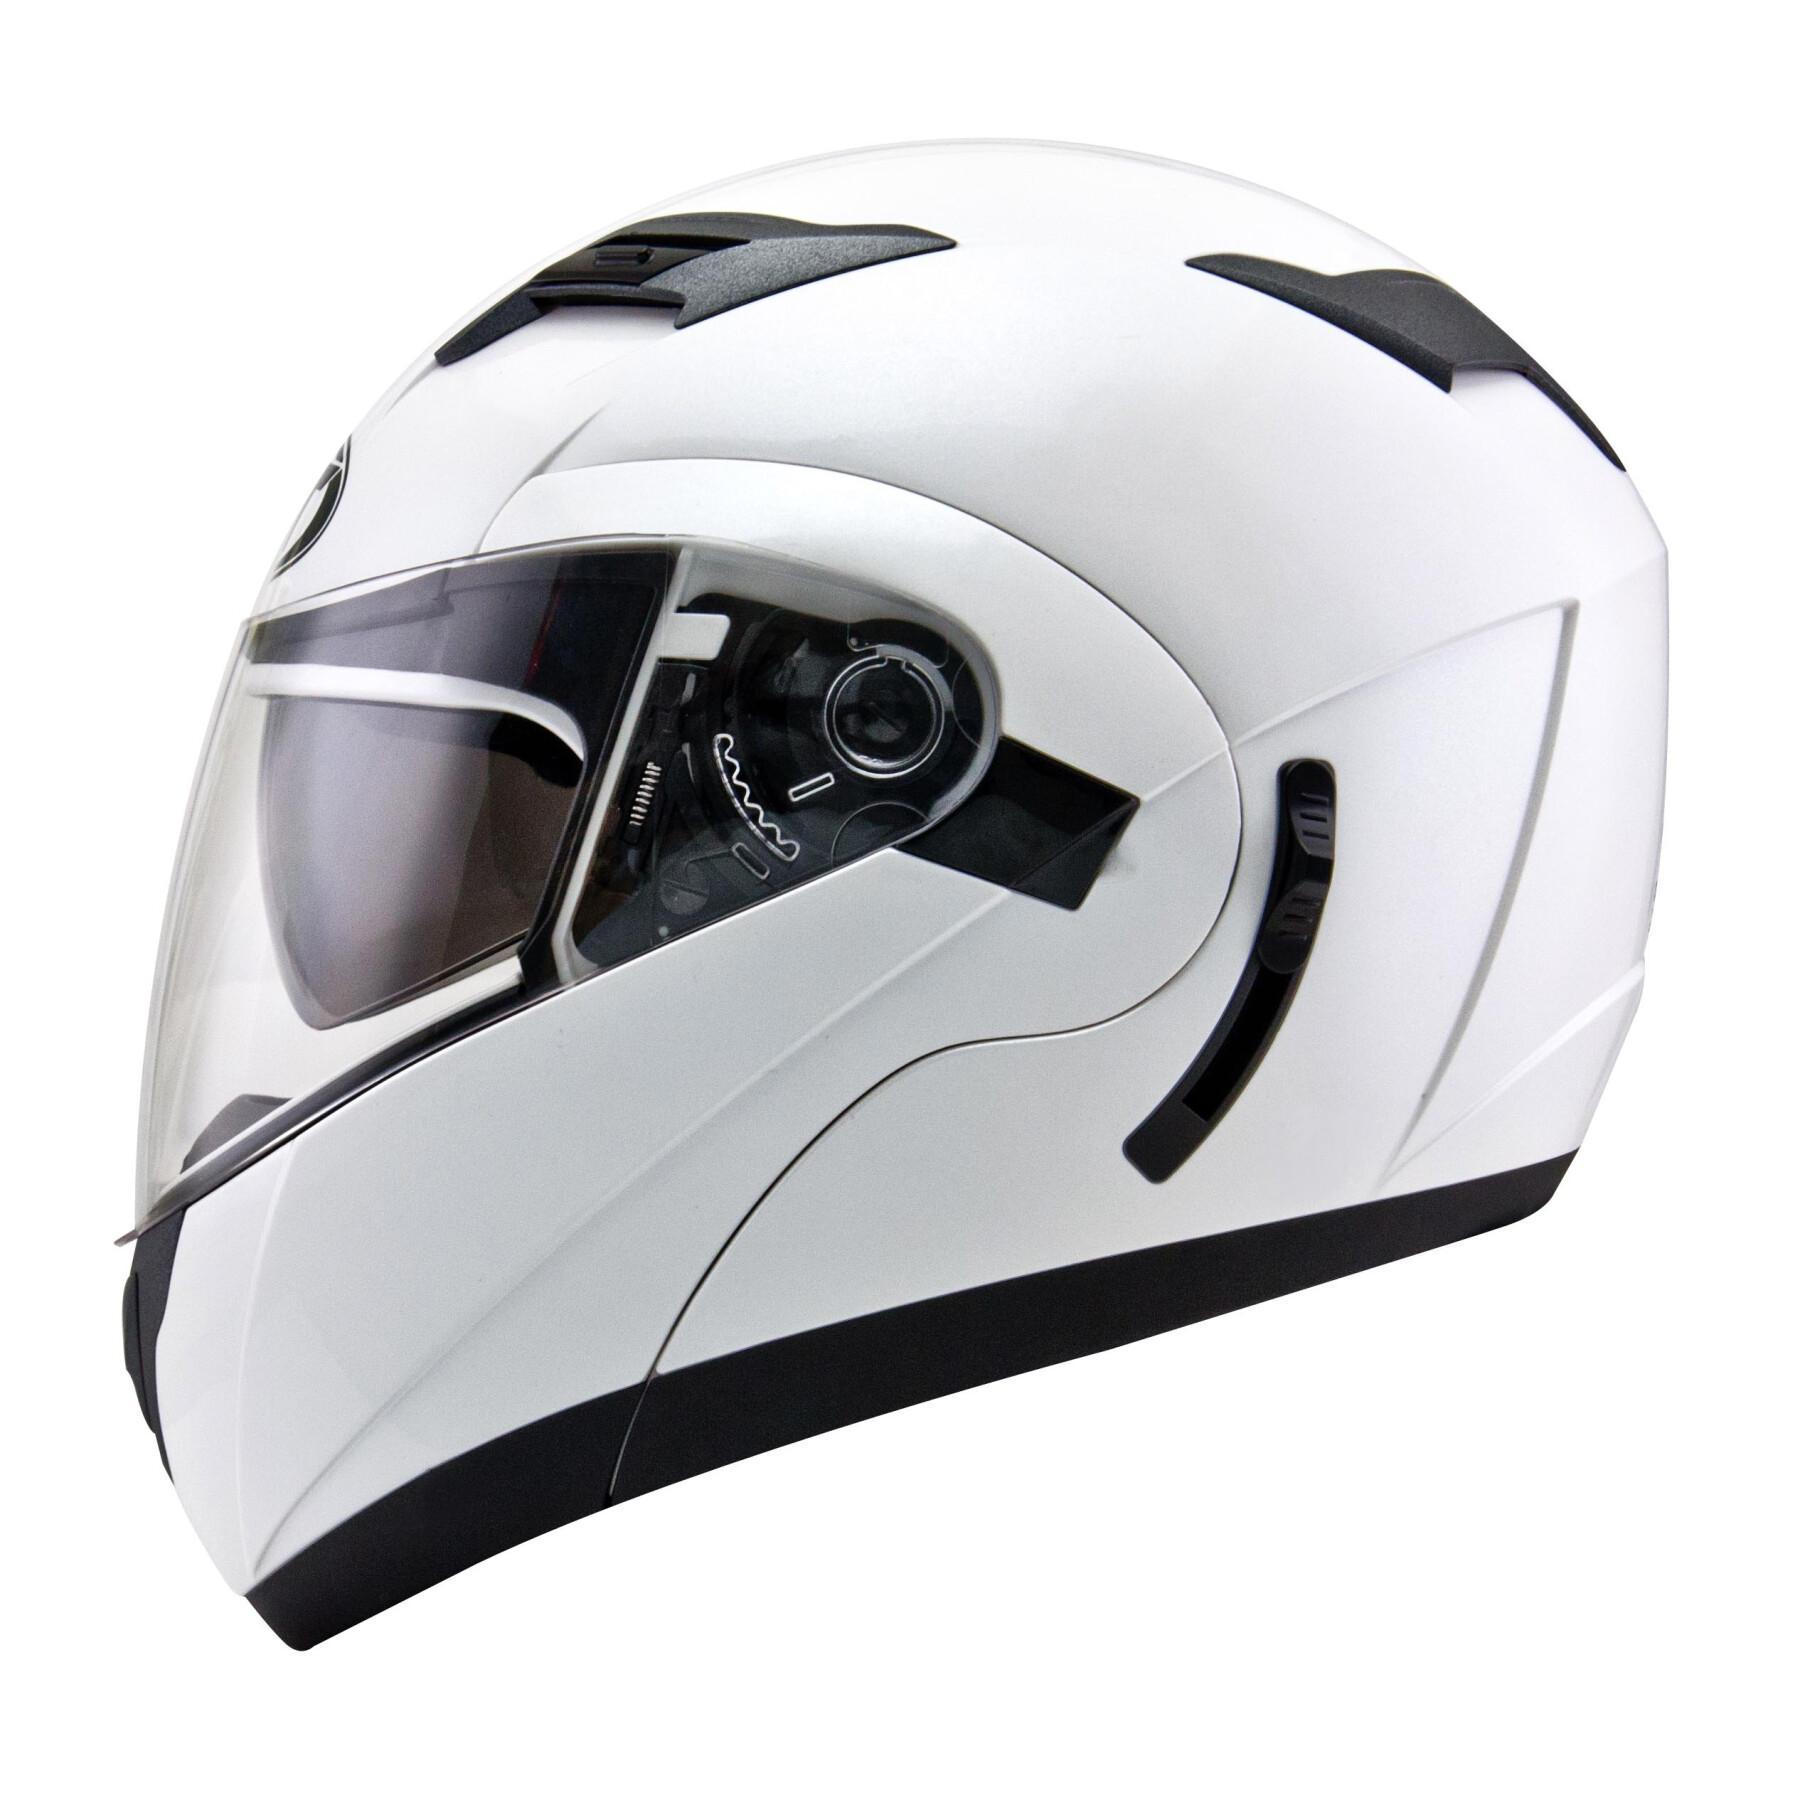 Modulaire helm Kyt cougar